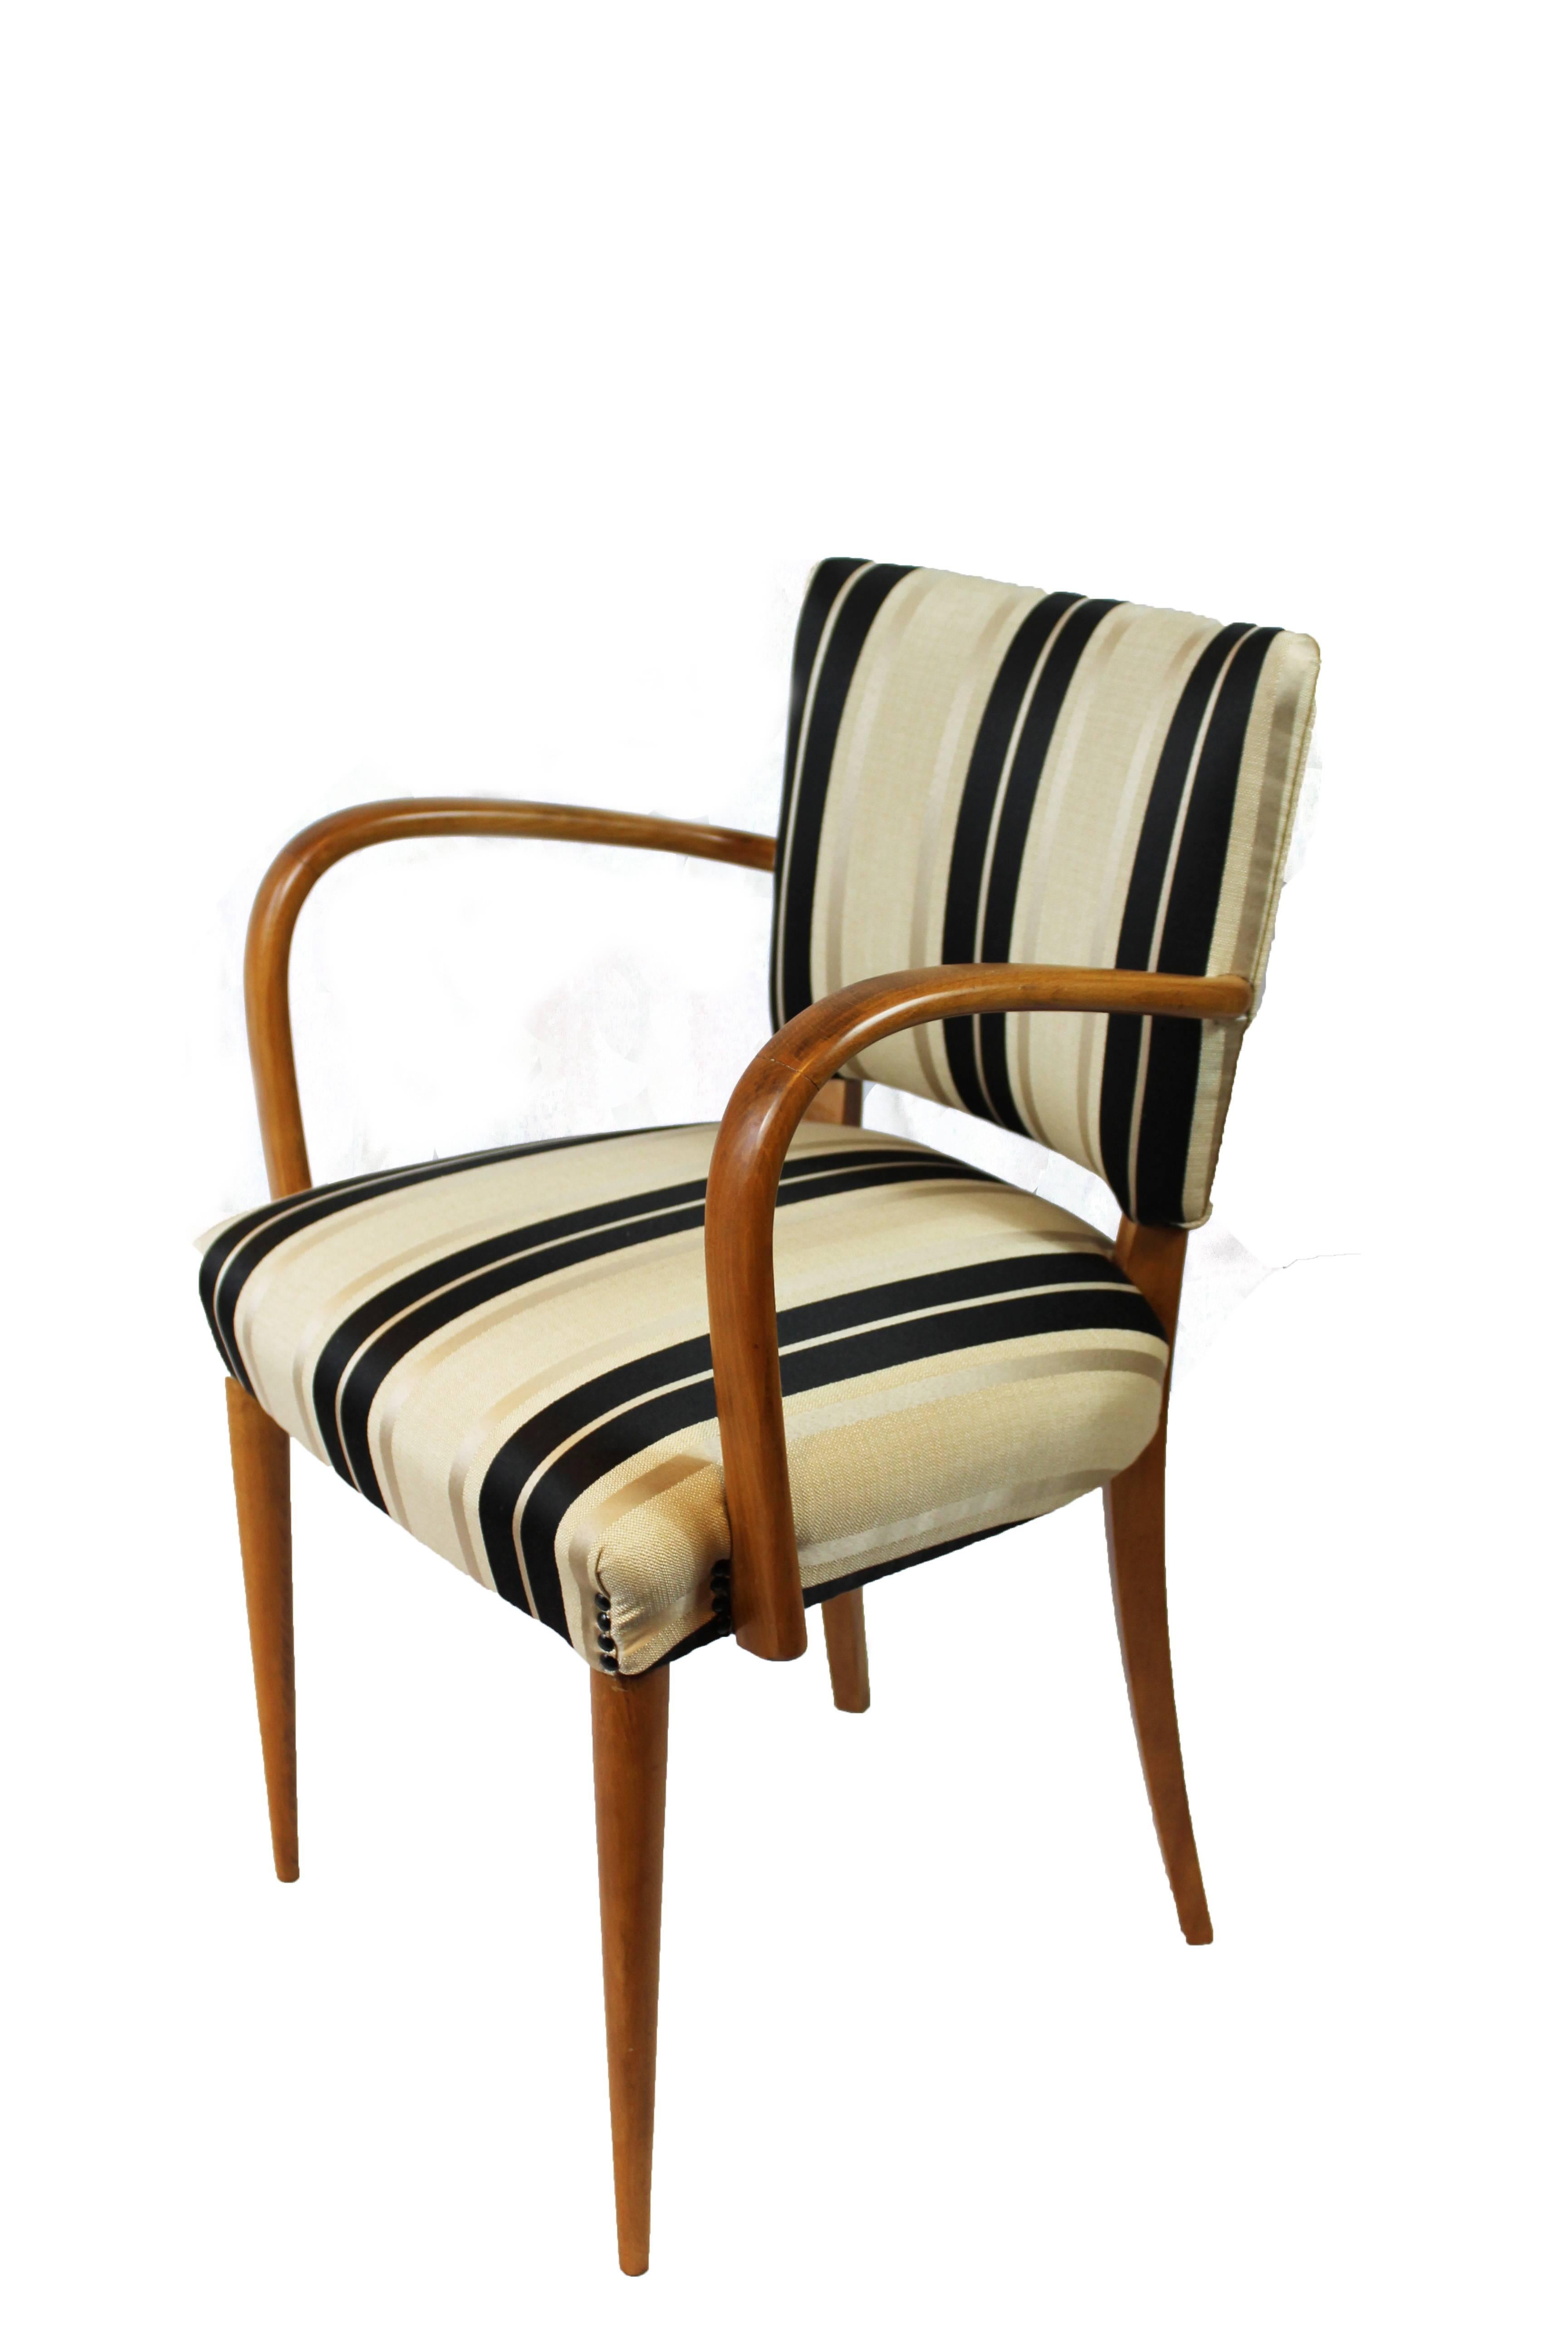 Olivewood Italian Desk Chair with Striped Jacquard Cushion, 1940s 2